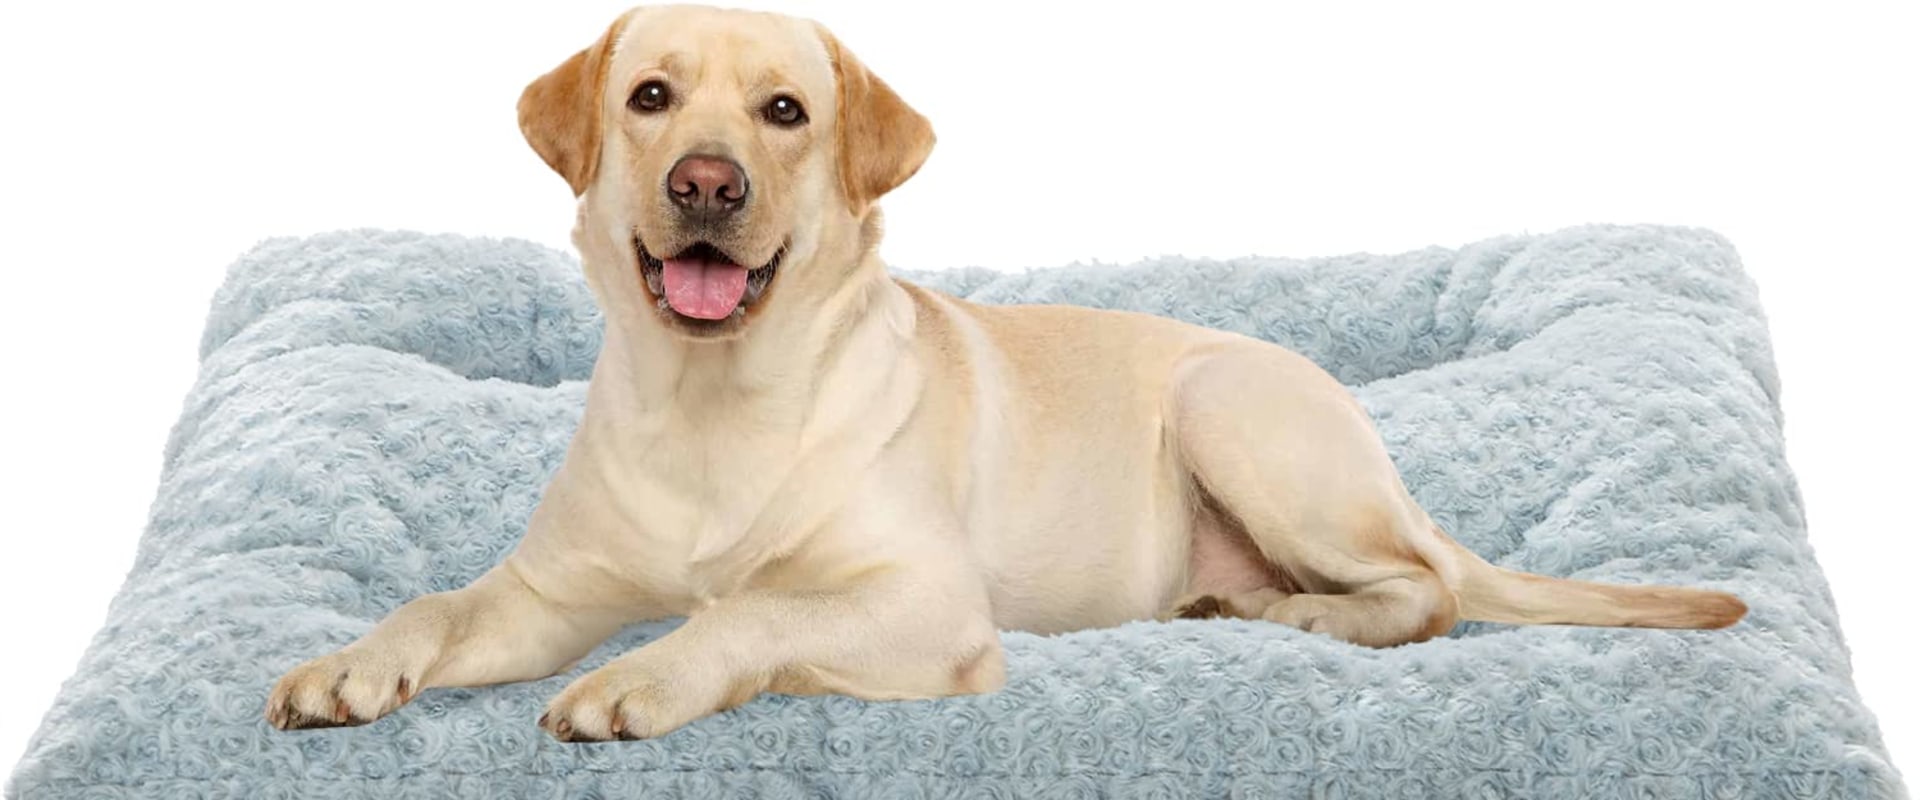 The Ultimate Guide to Buying an Orthopedic Pet Bed